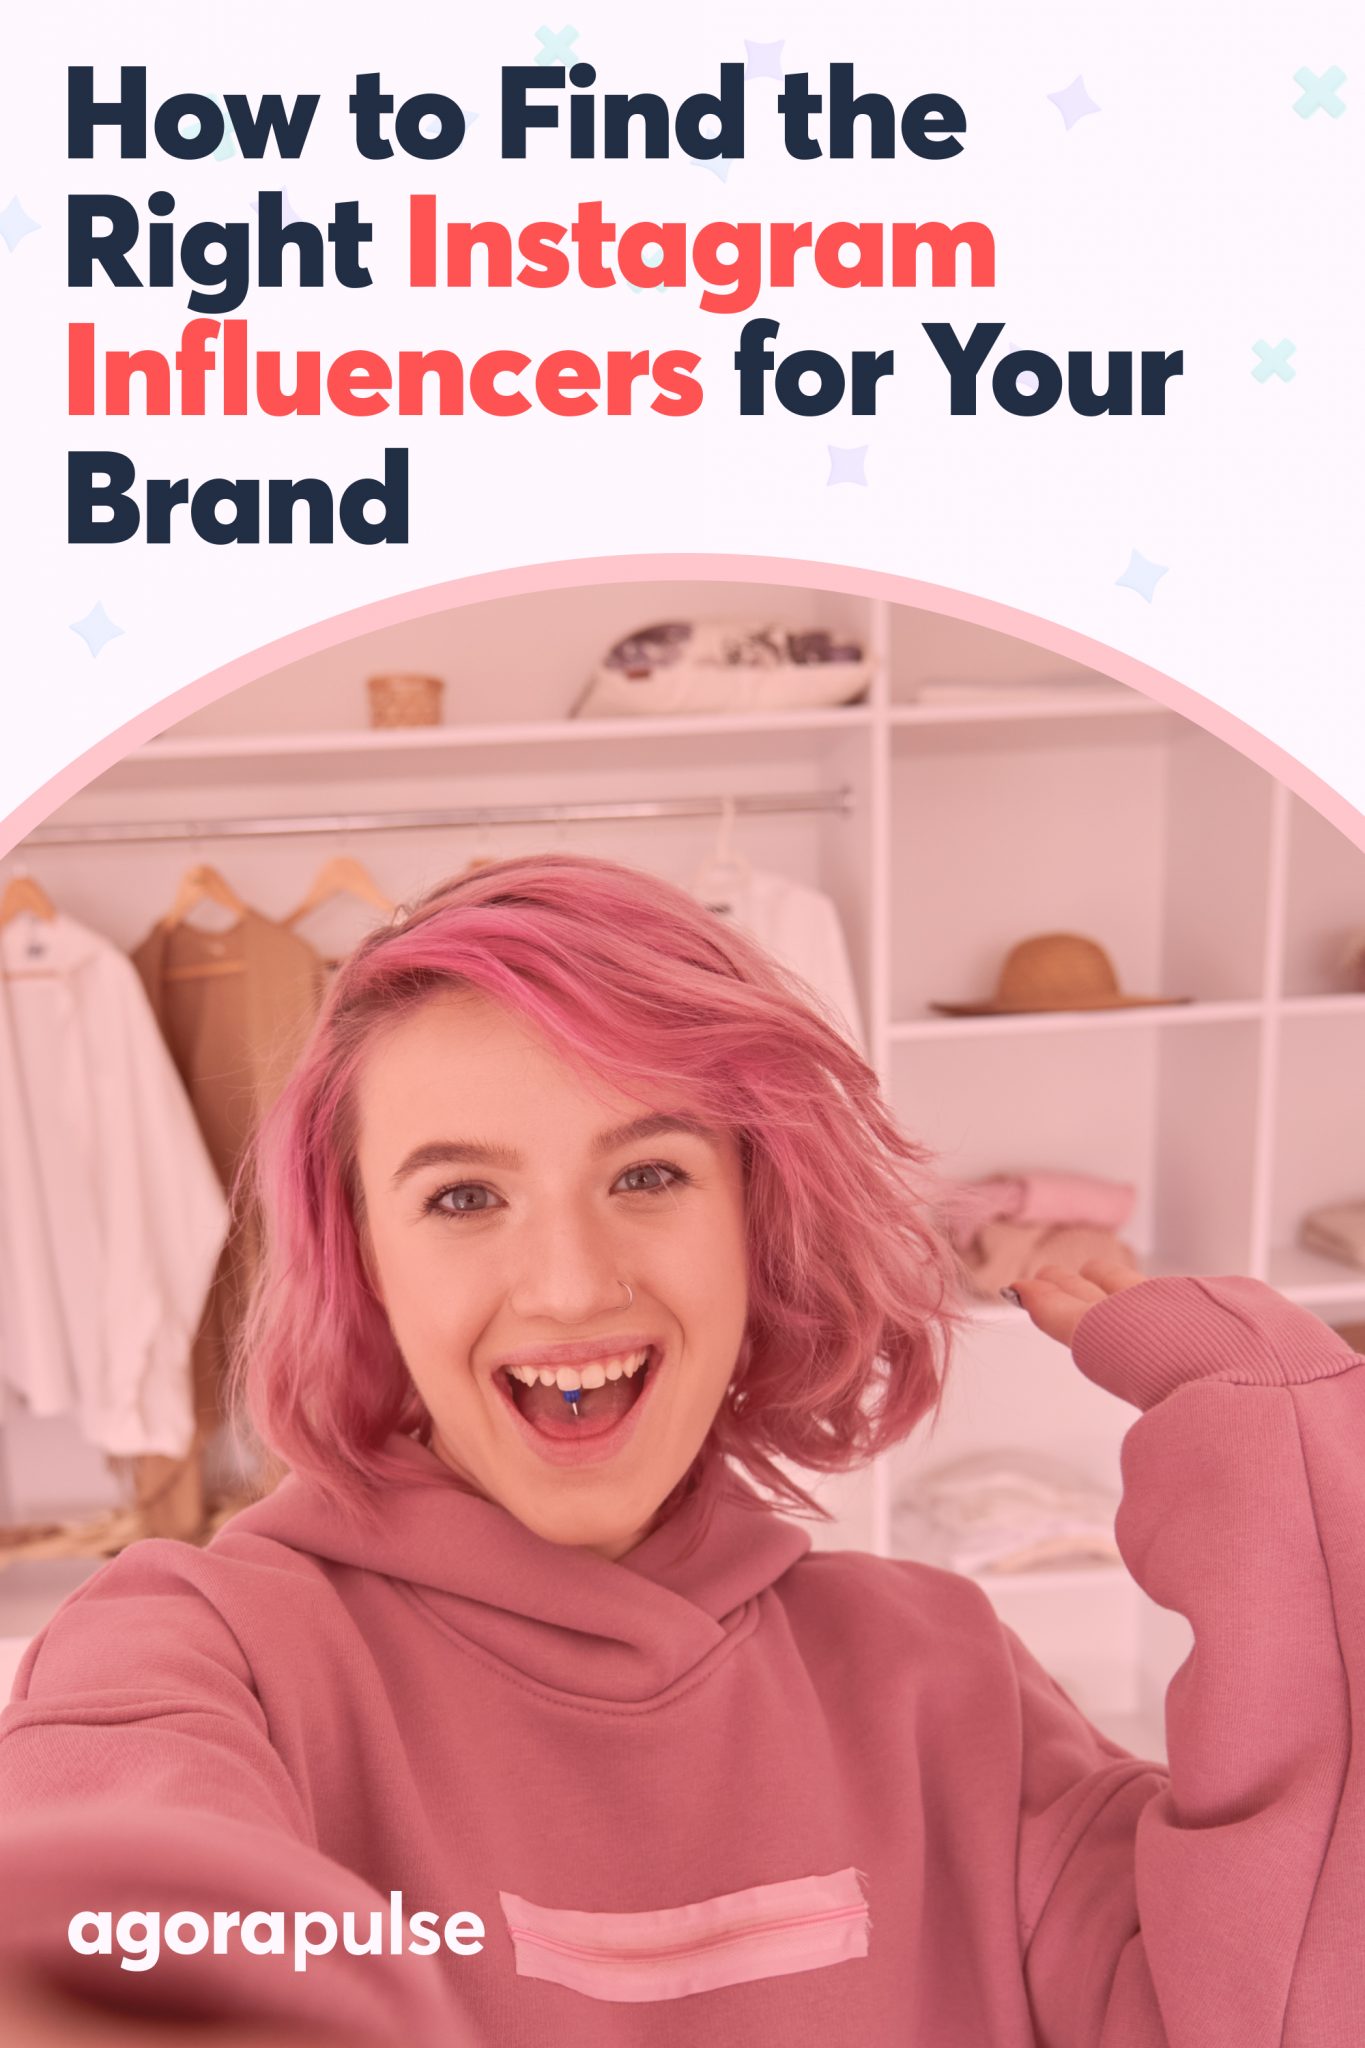 How to Find the Right Instagram Influencers for Your Brand